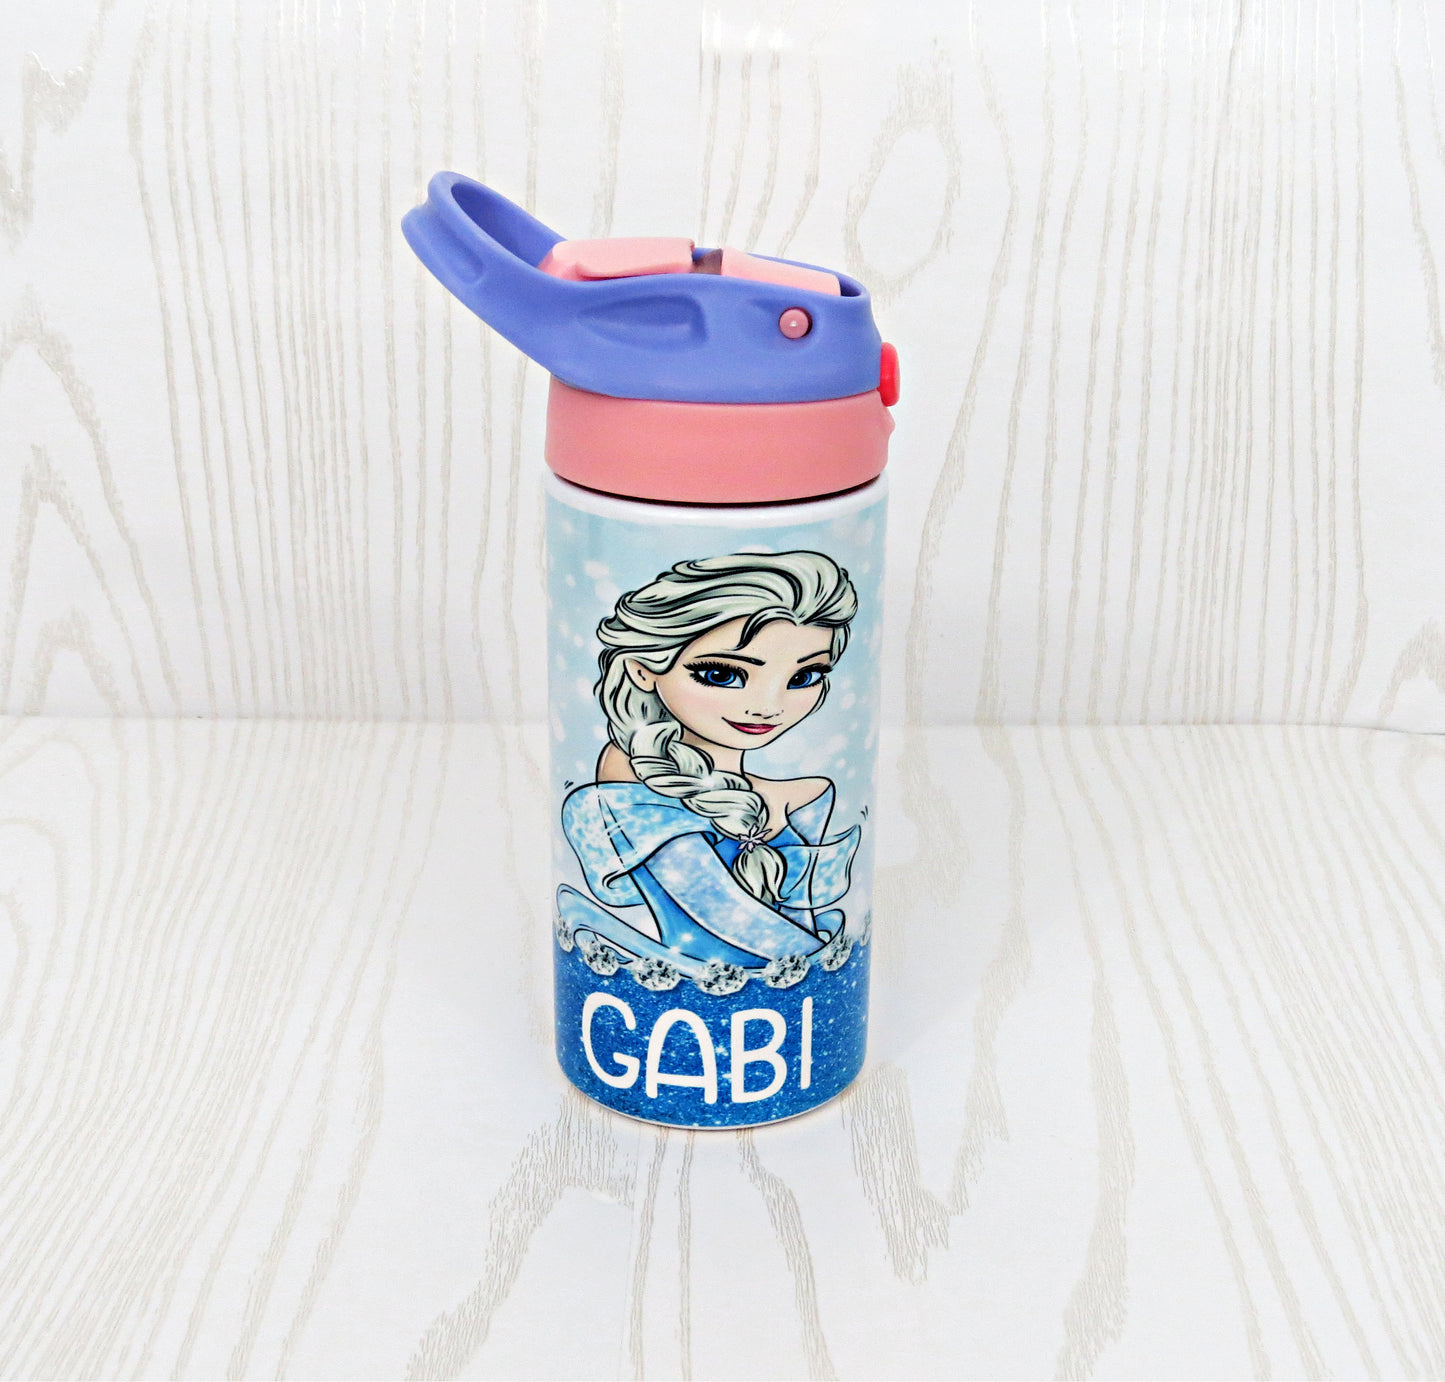 Personalized Insulated Water Bottles For Girls